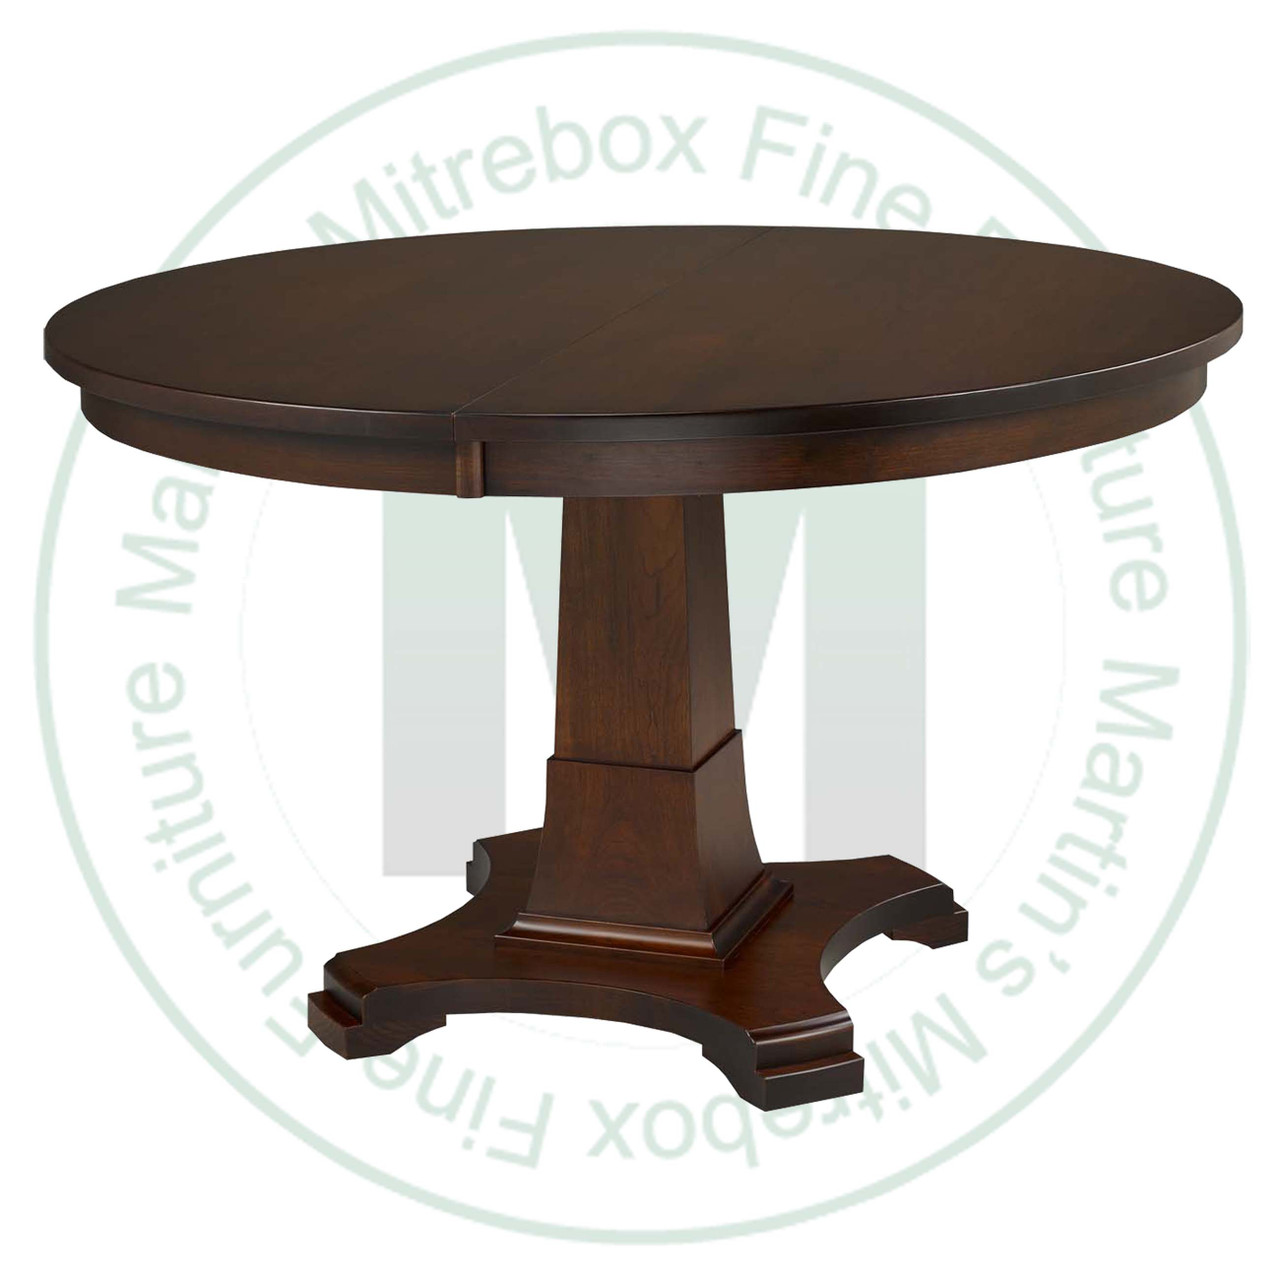 Oak Abbey Single Pedestal Table 36''D x 48''W x 30''H  Round Solid Table. Table Has 1.25'' Thick Top